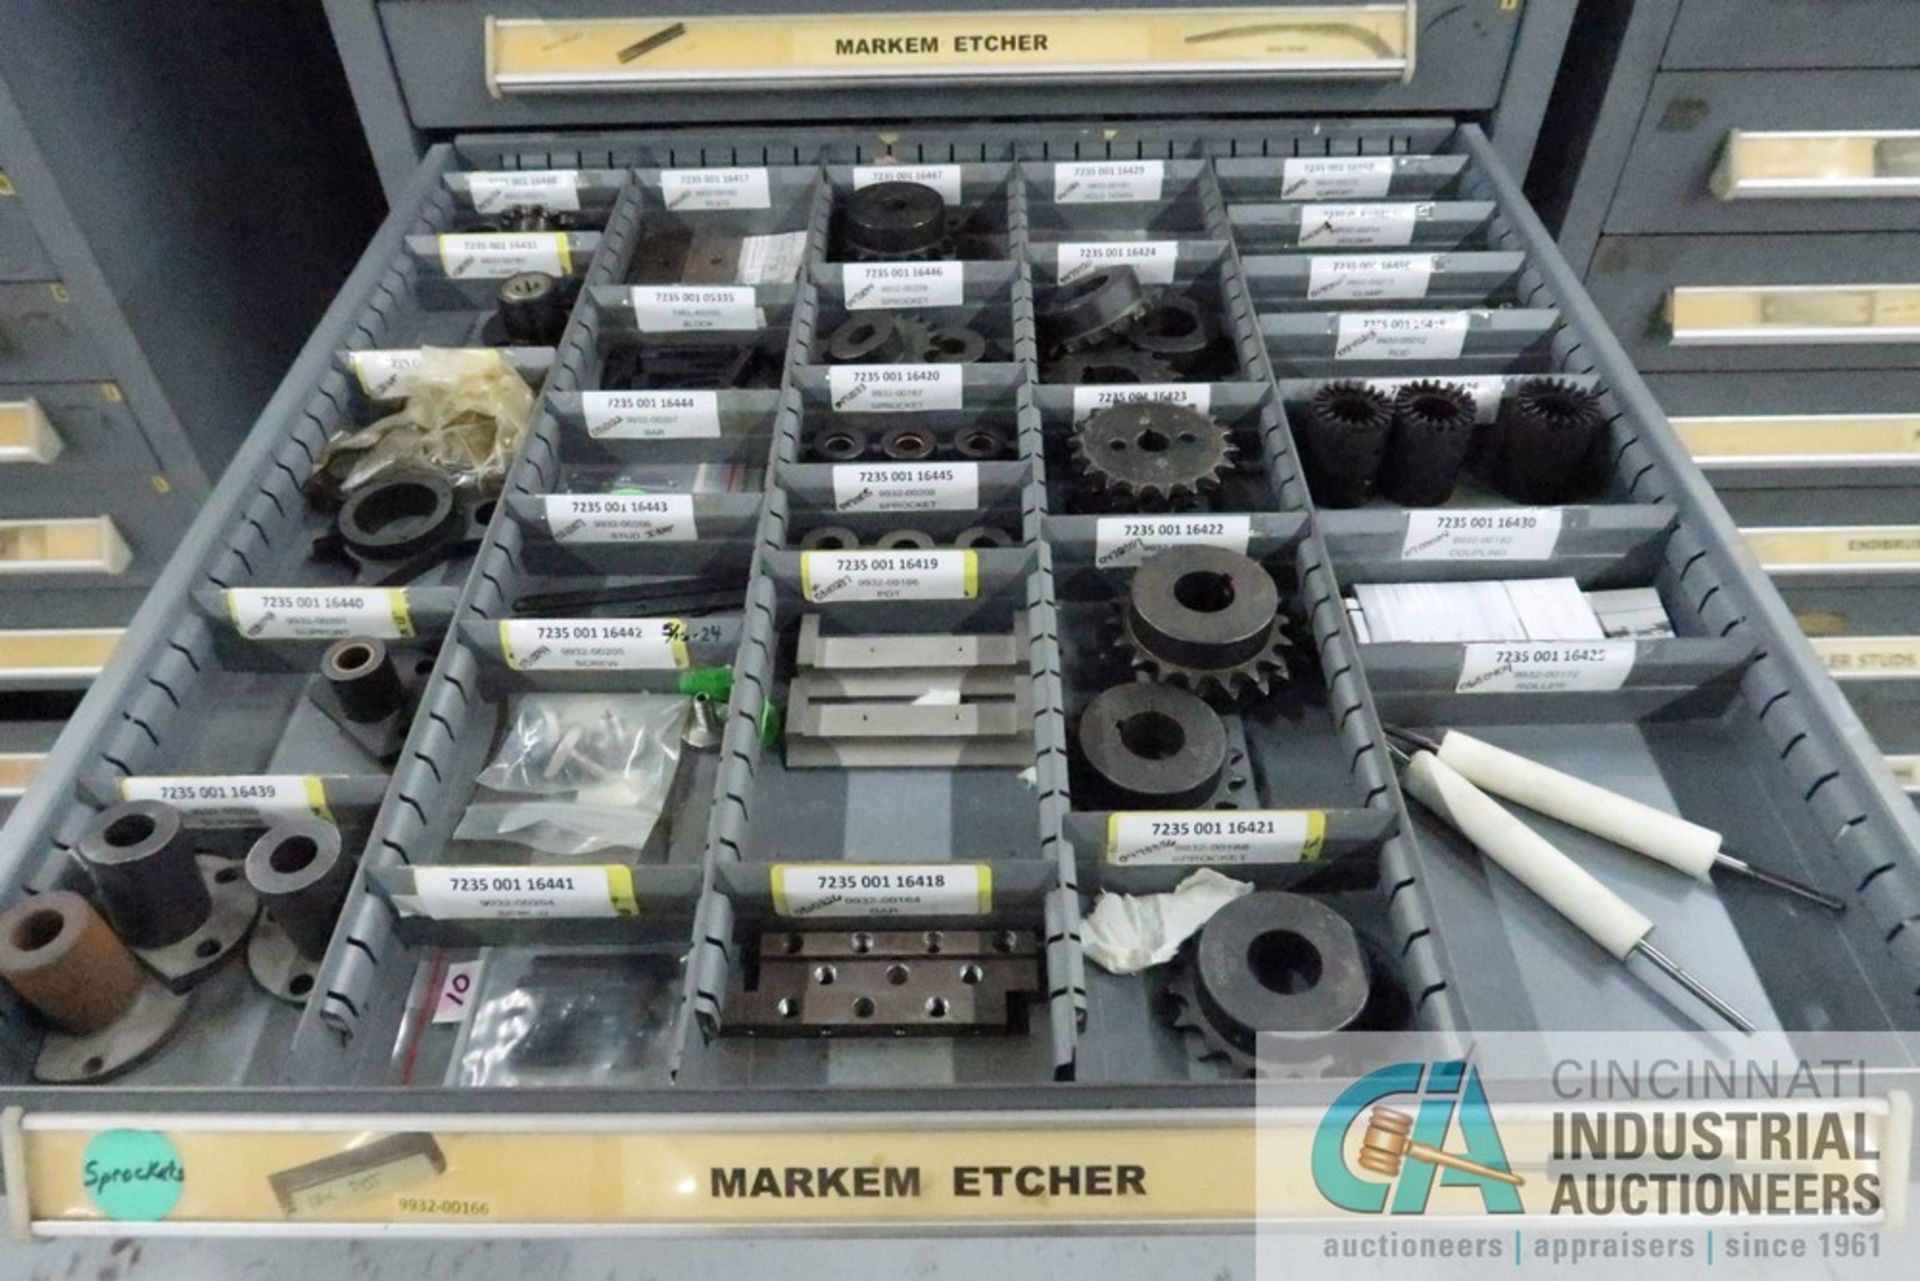 11-DRAWER VIDMAR CABINET WITH CONTENTS INCLUDING MISCELLANEOUS MARKER ETCHER PARTS, KNIVES, - Image 3 of 8